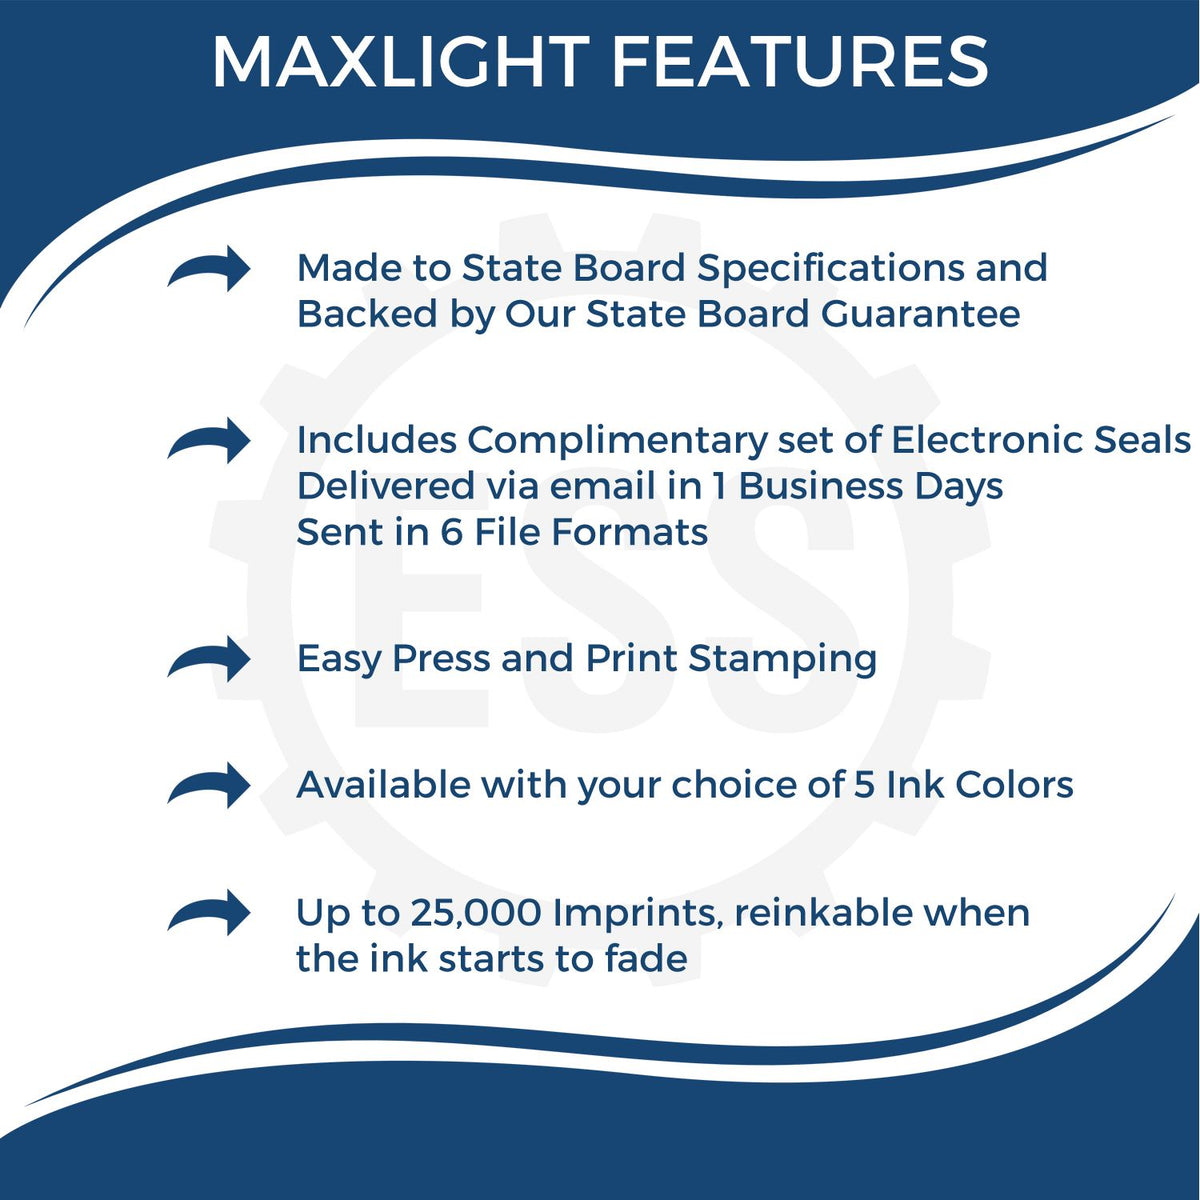 A picture of an infographic highlighting the selling points for the Premium MaxLight Pre-Inked Kentucky Engineering Stamp